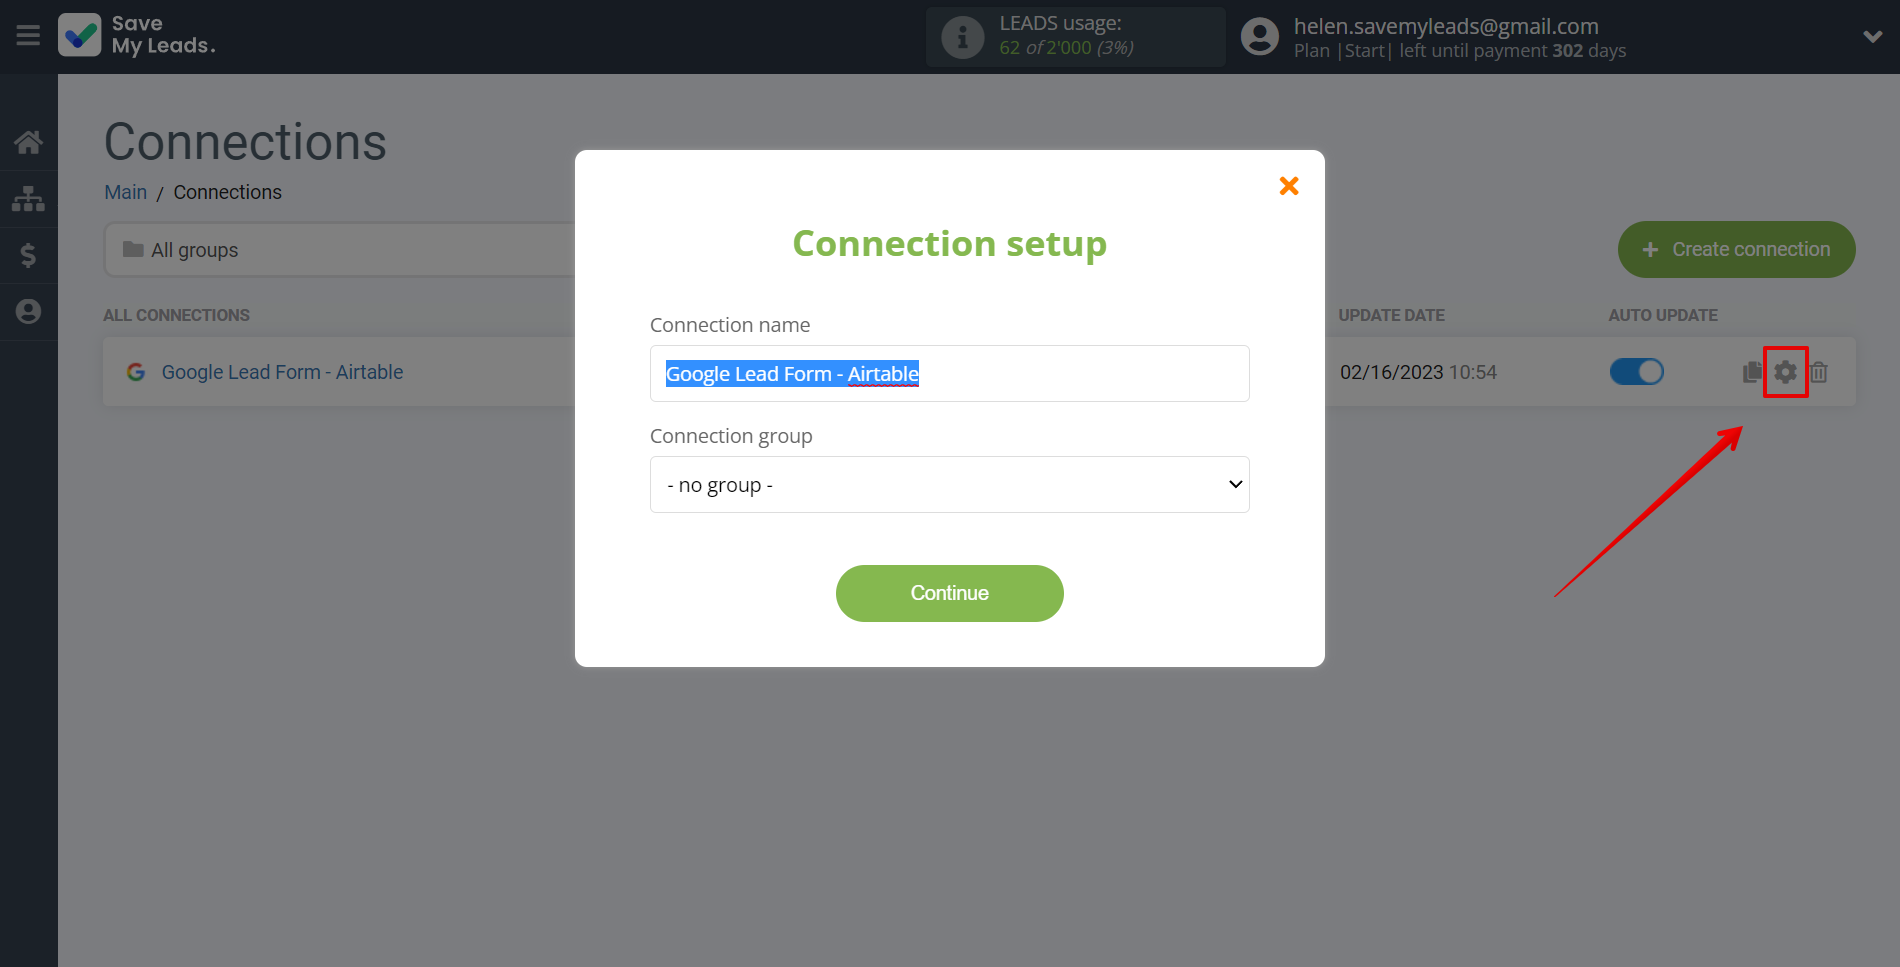 How to Connect Google Lead Form with AirTable | Name and group connection